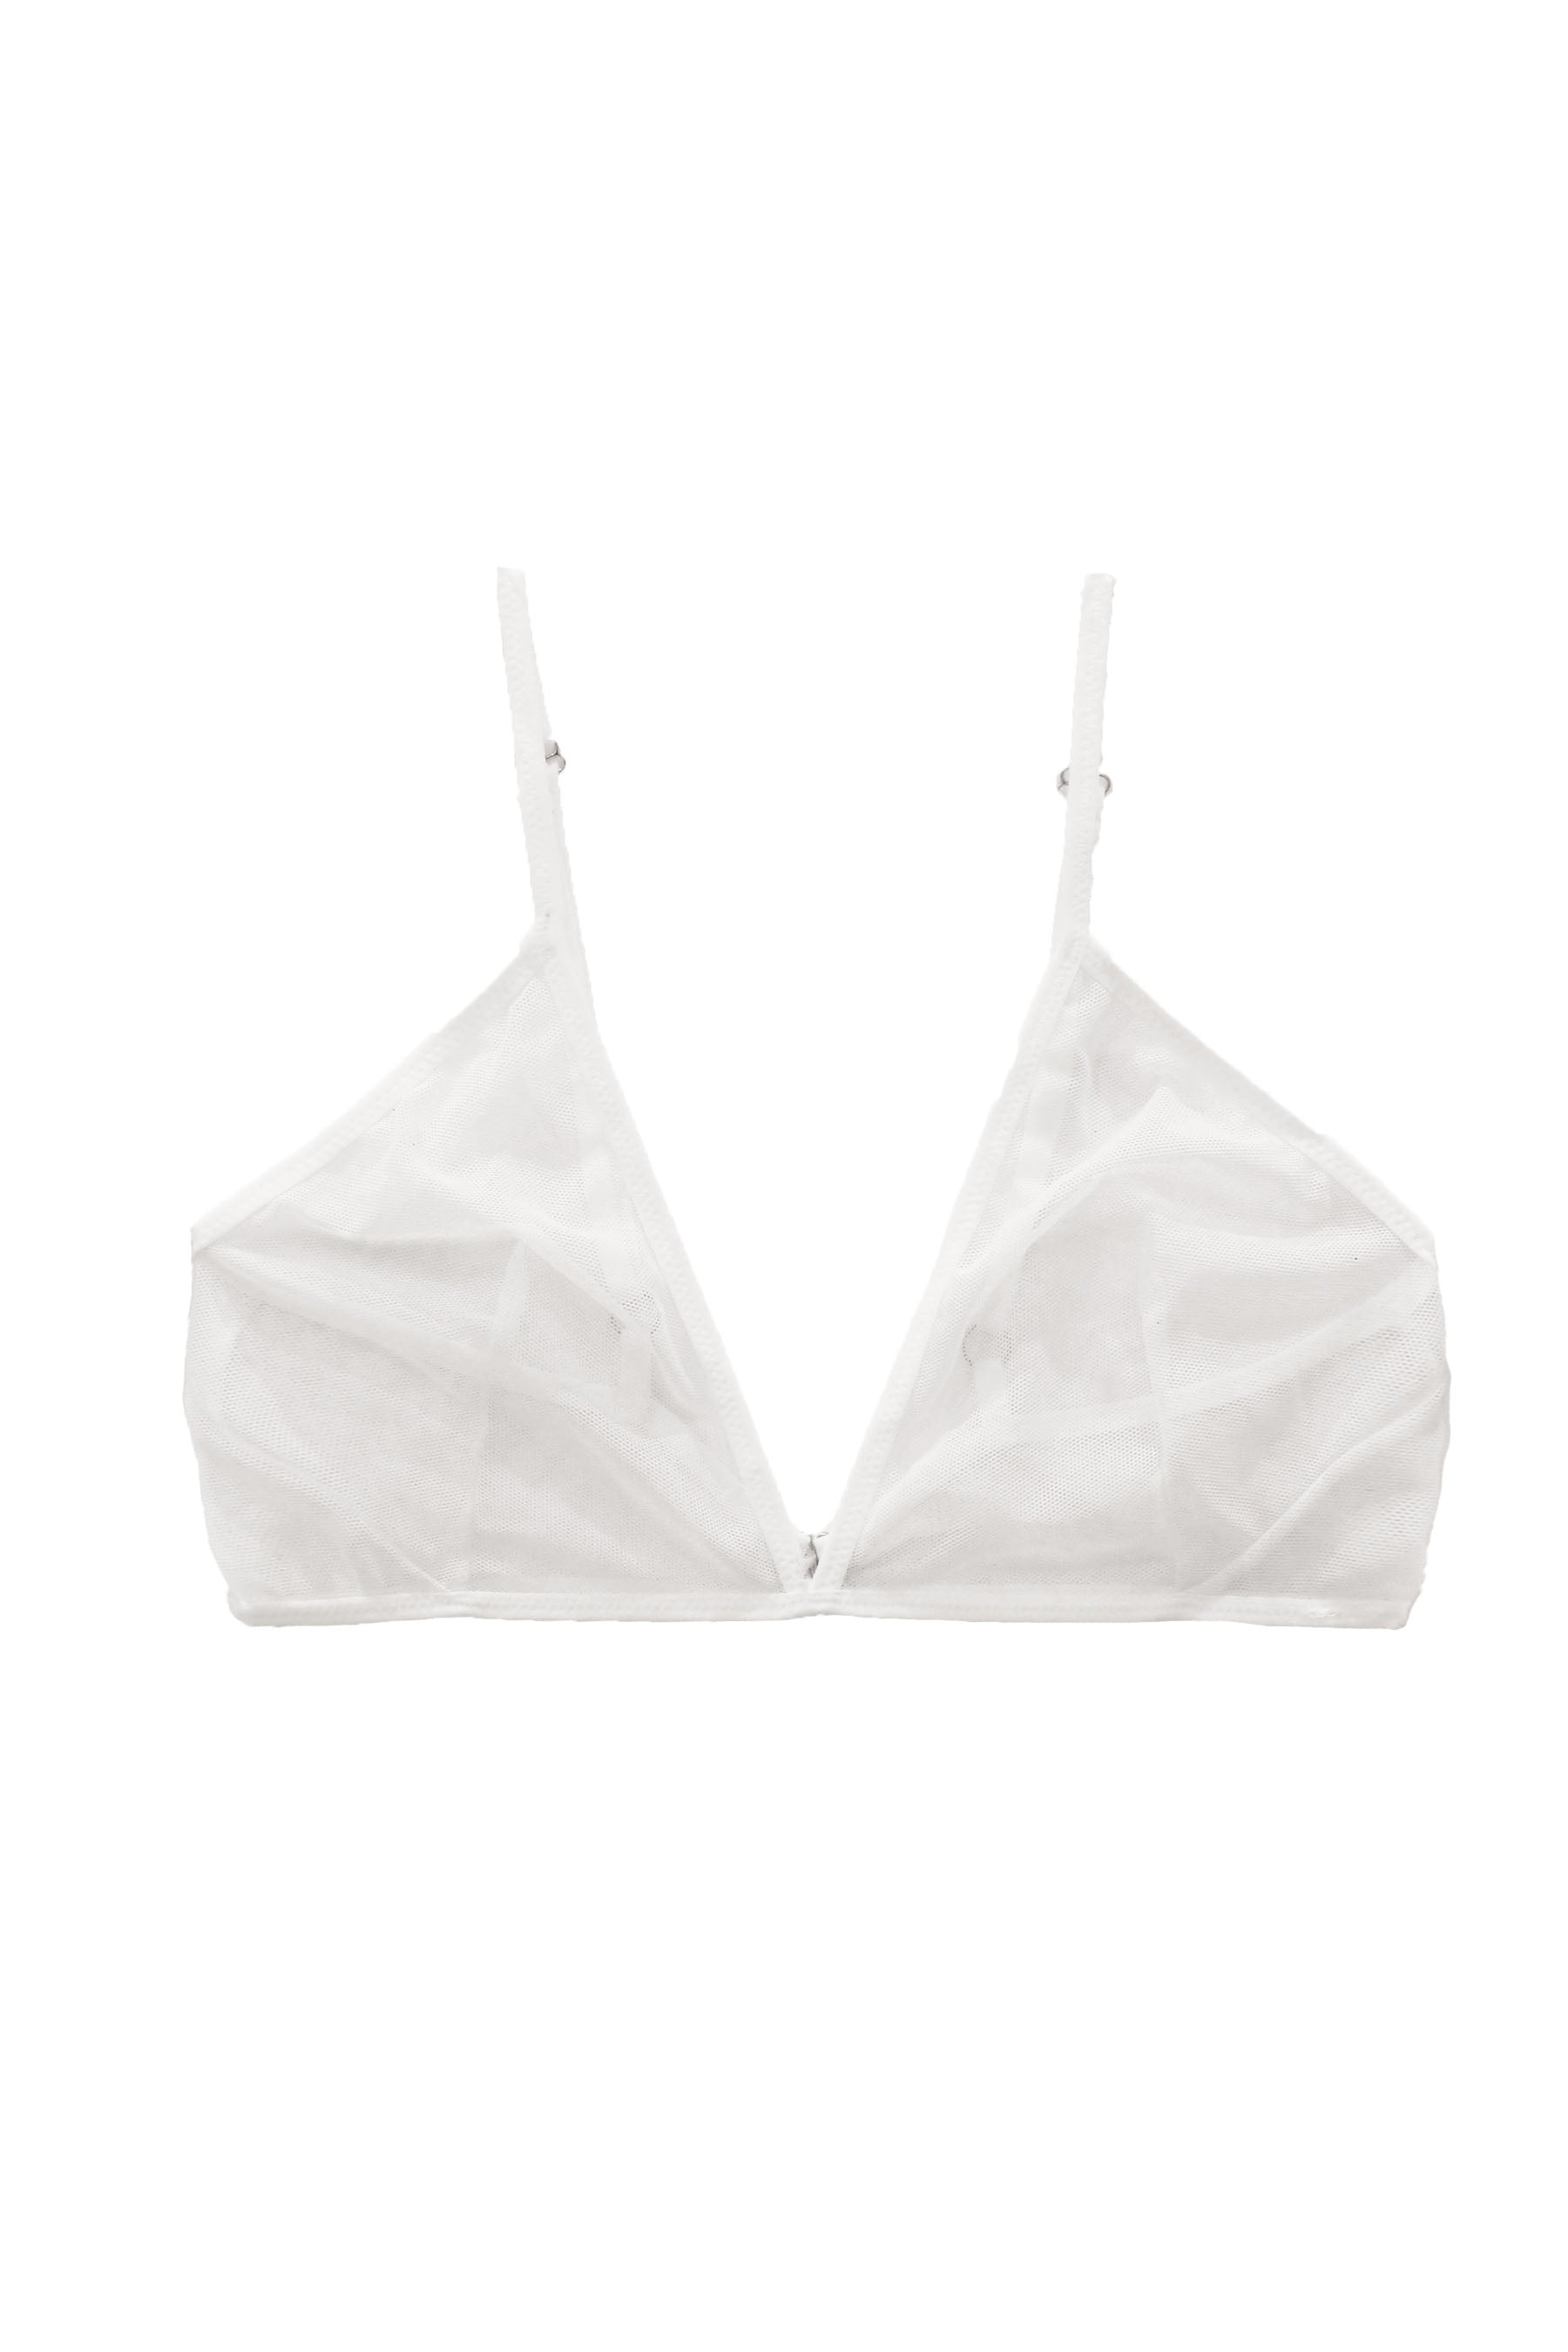 MARY YOUNG Georgie Bra in White